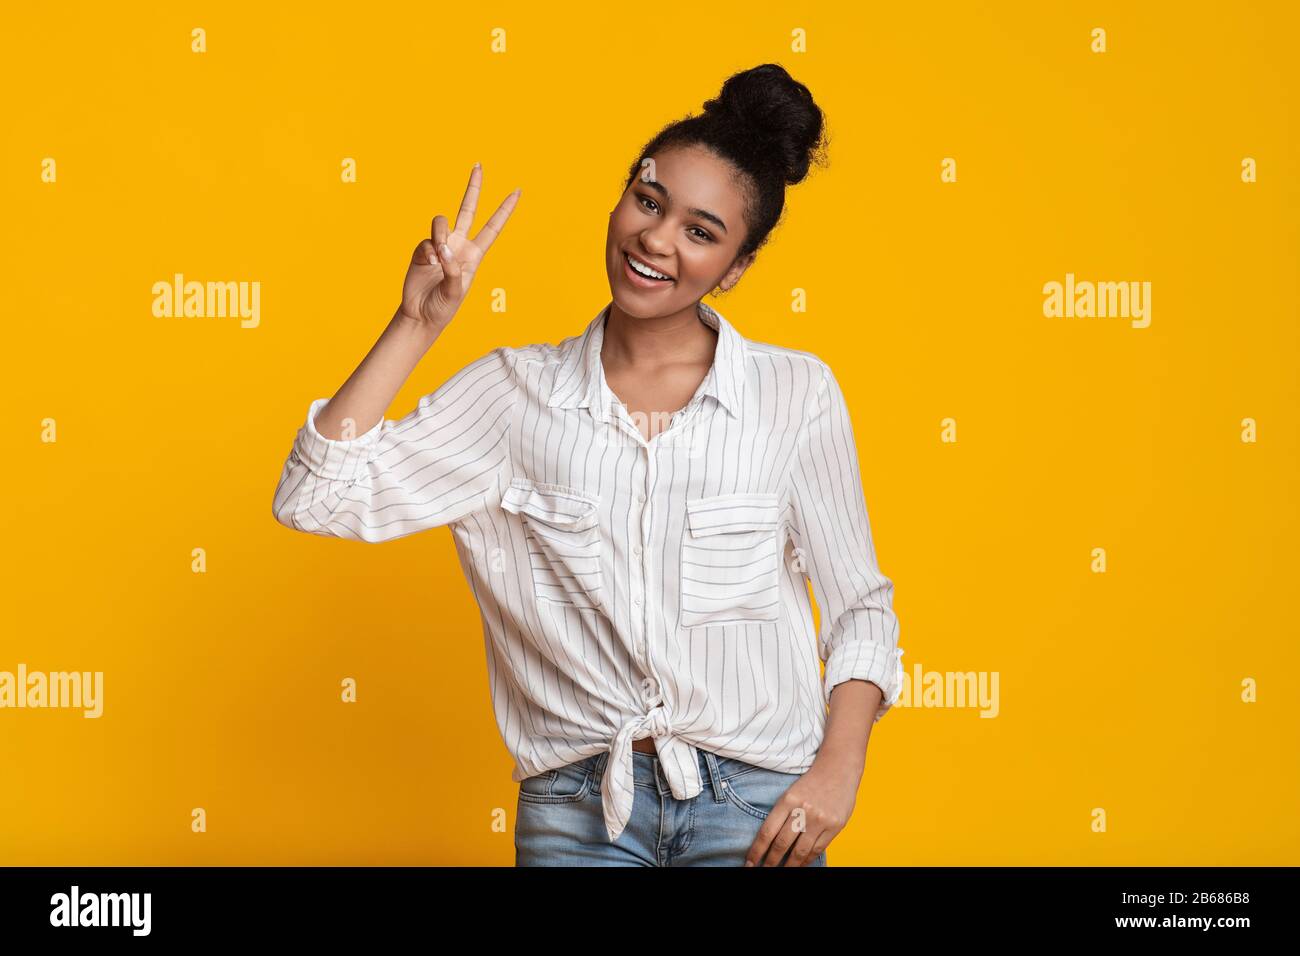 Happy Black Woman Showing Peace Gesture, Gesturing V-Sign Over Yellow Background Stock Photo